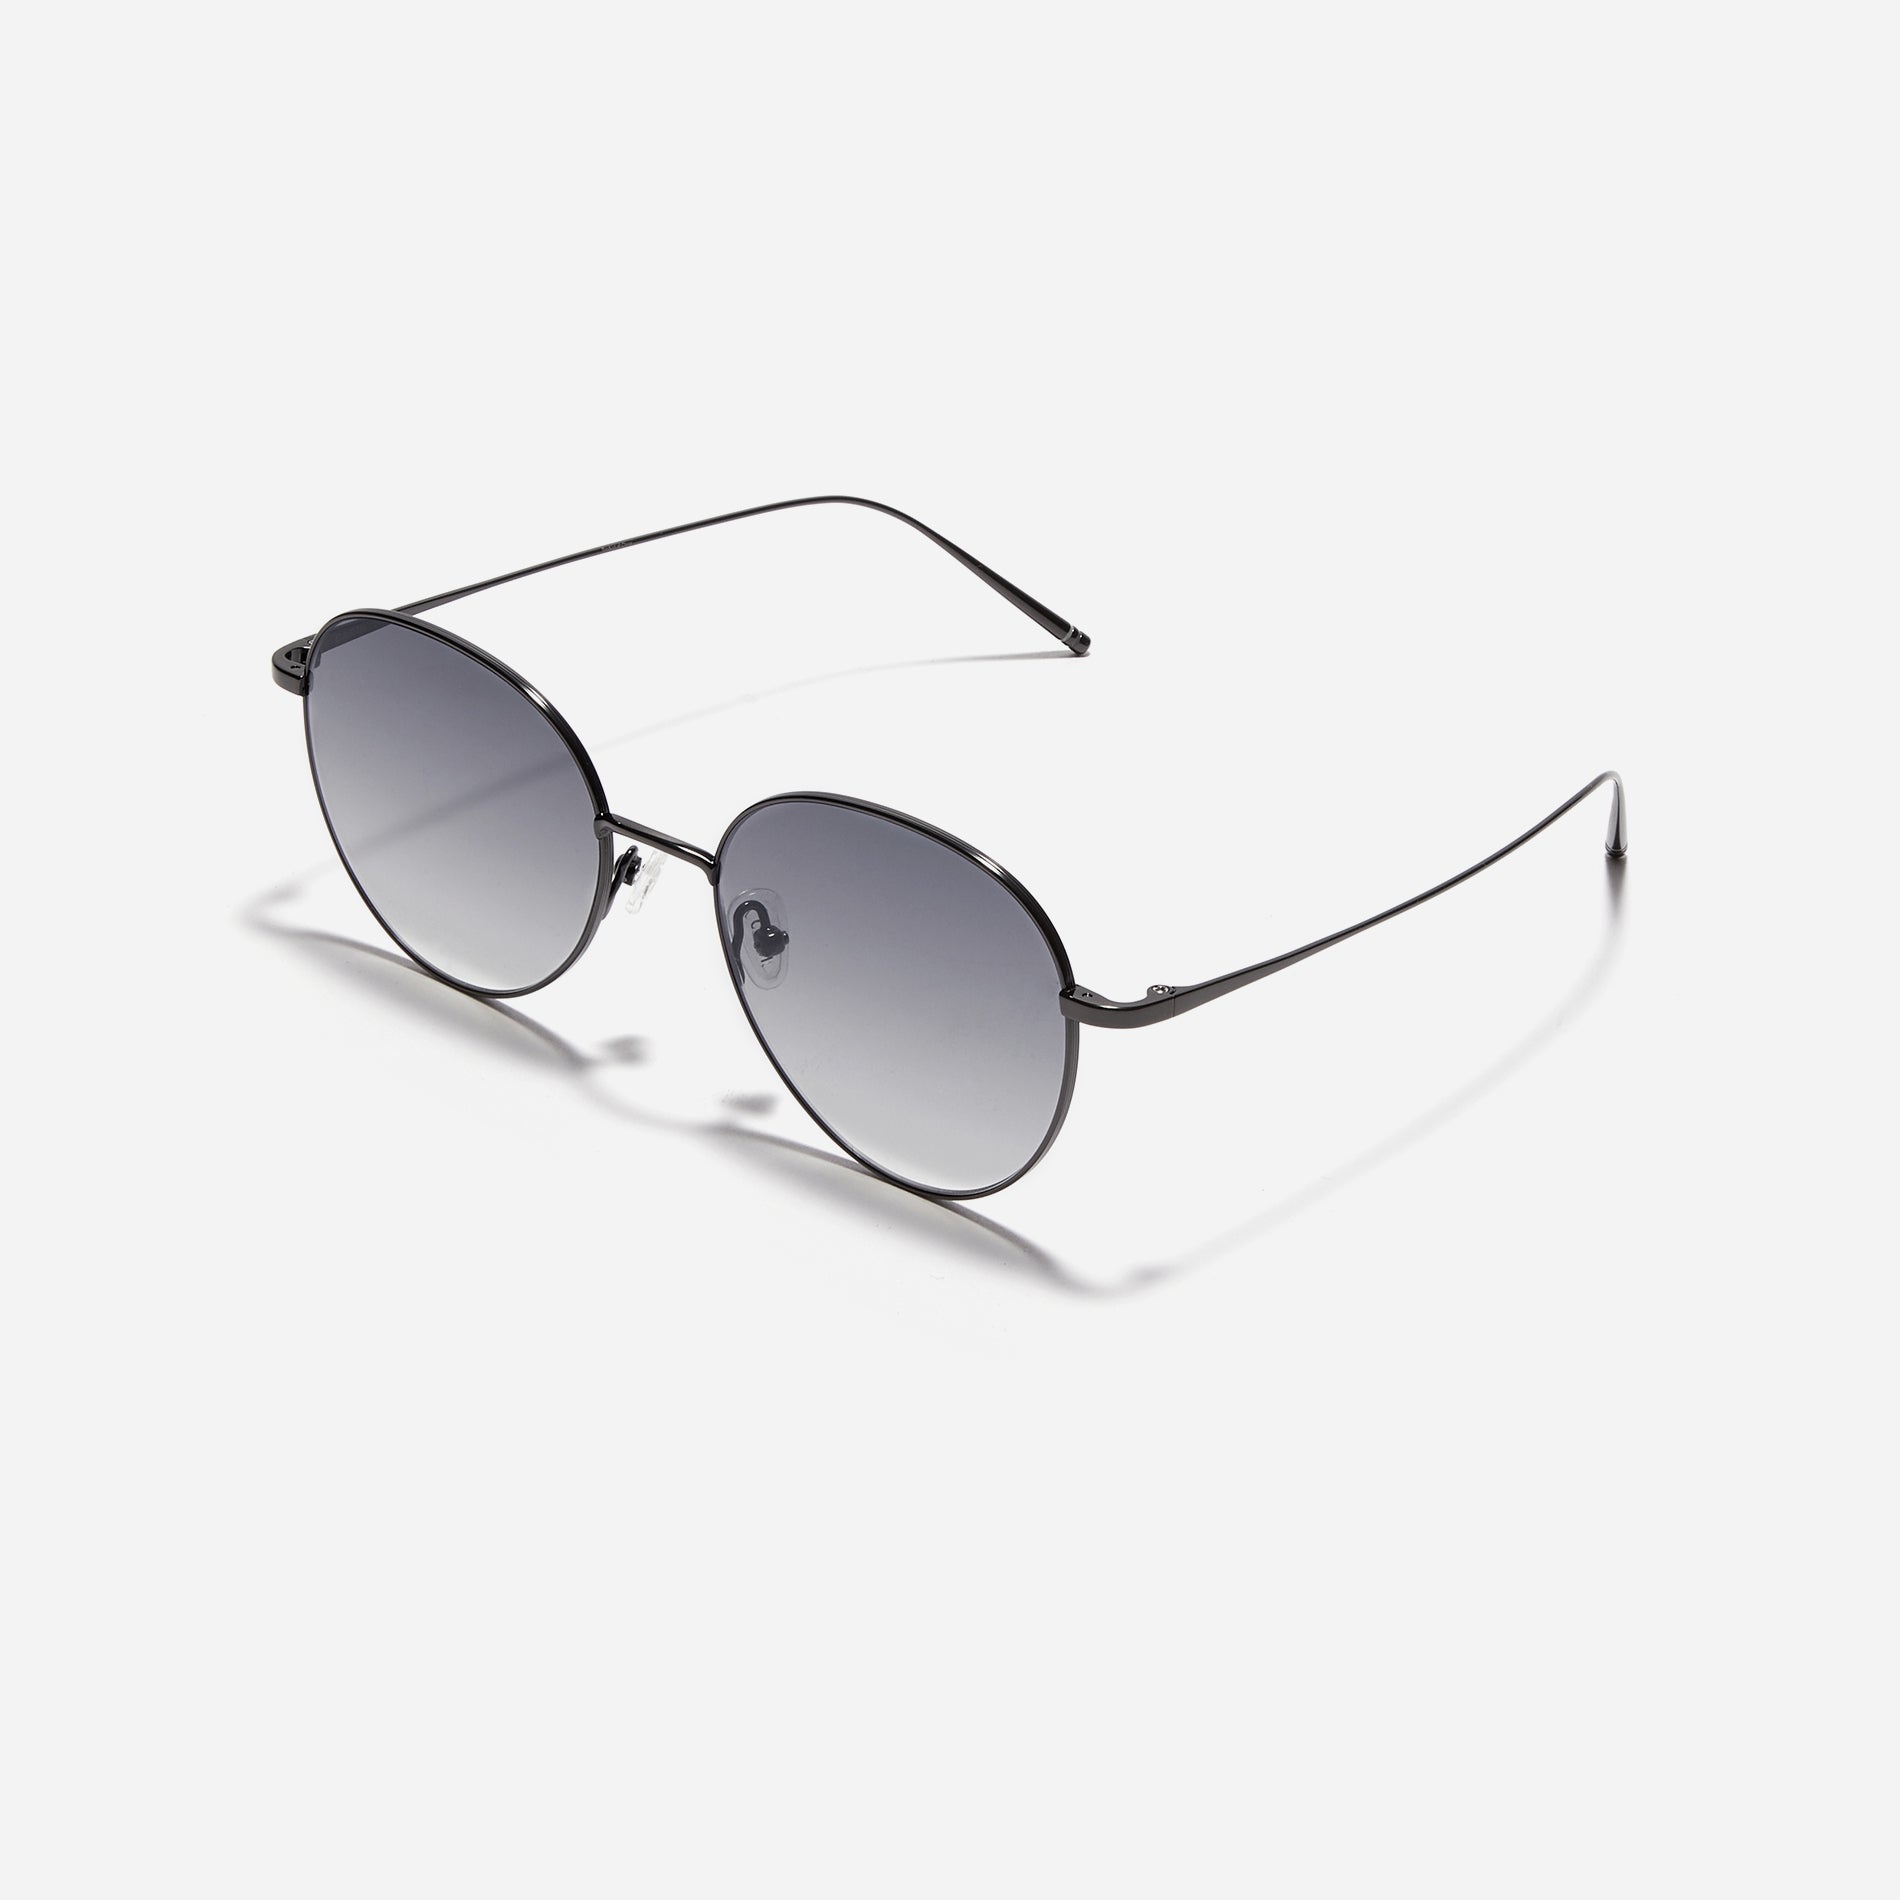 Round-shaped sunglasses crafted entirely from lightweight titanium. They feature semi-mirrored lenses that effectively reflect light, minimizing eye fatigue.